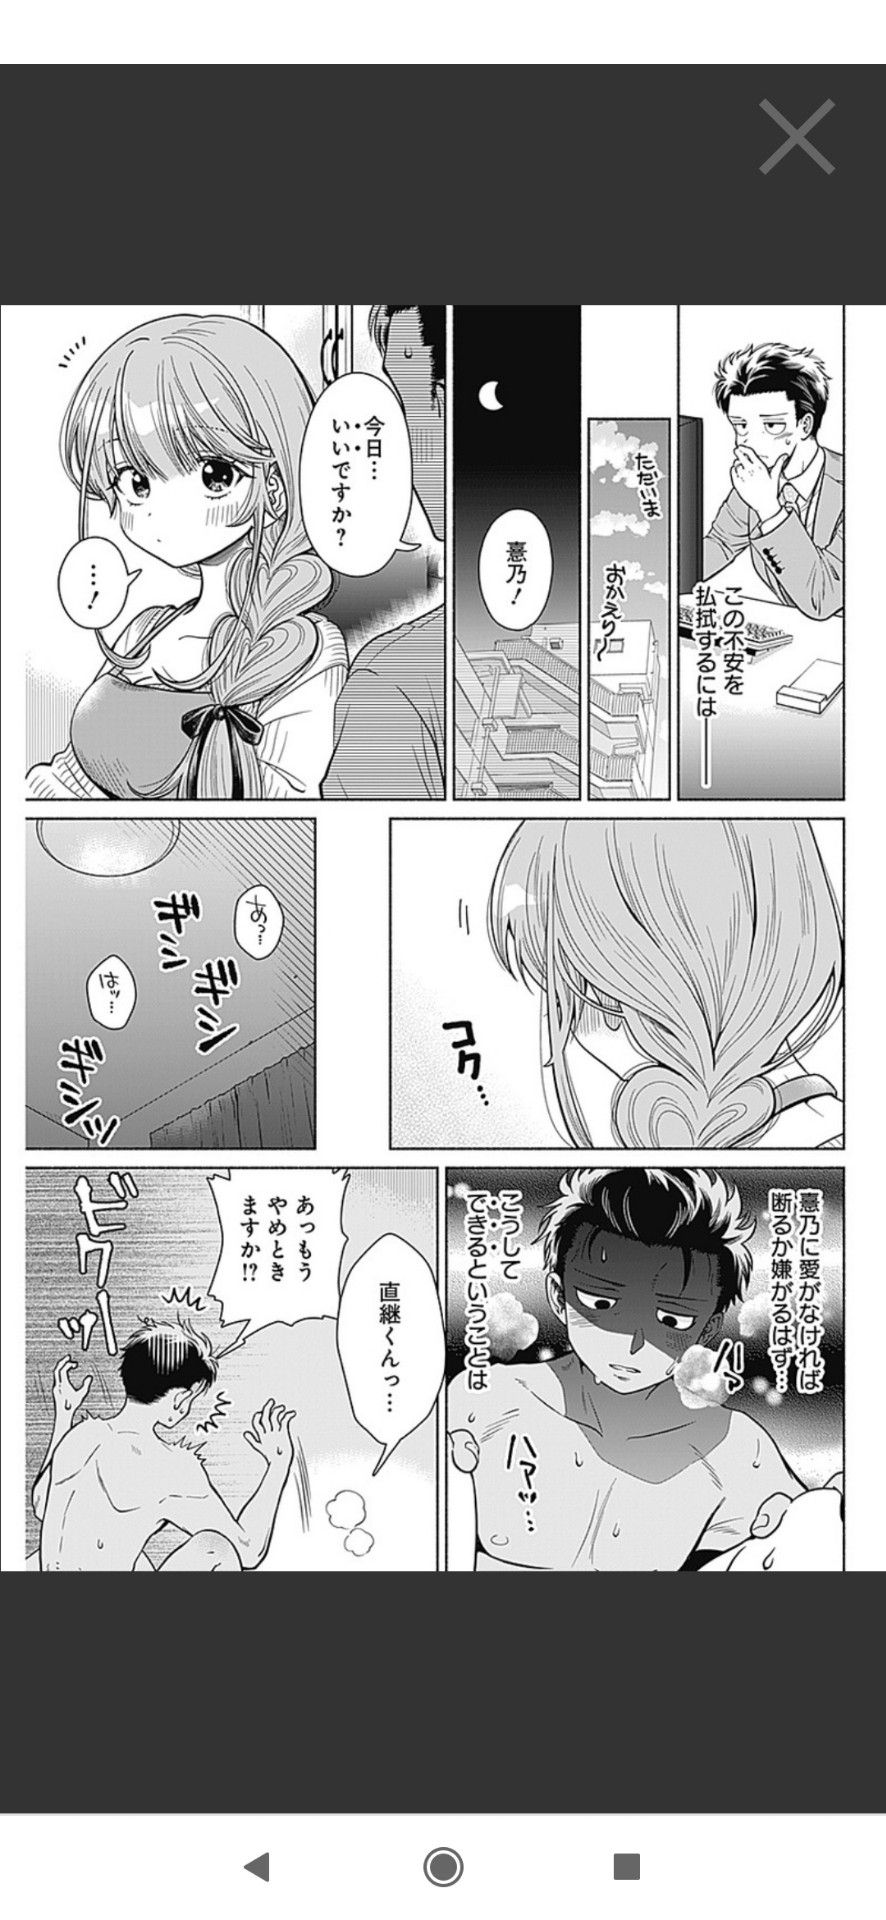 【Image】 A love comedy comic book in which an old man over 30 is enthusiastic is talked about as too much of a kimo ... 5